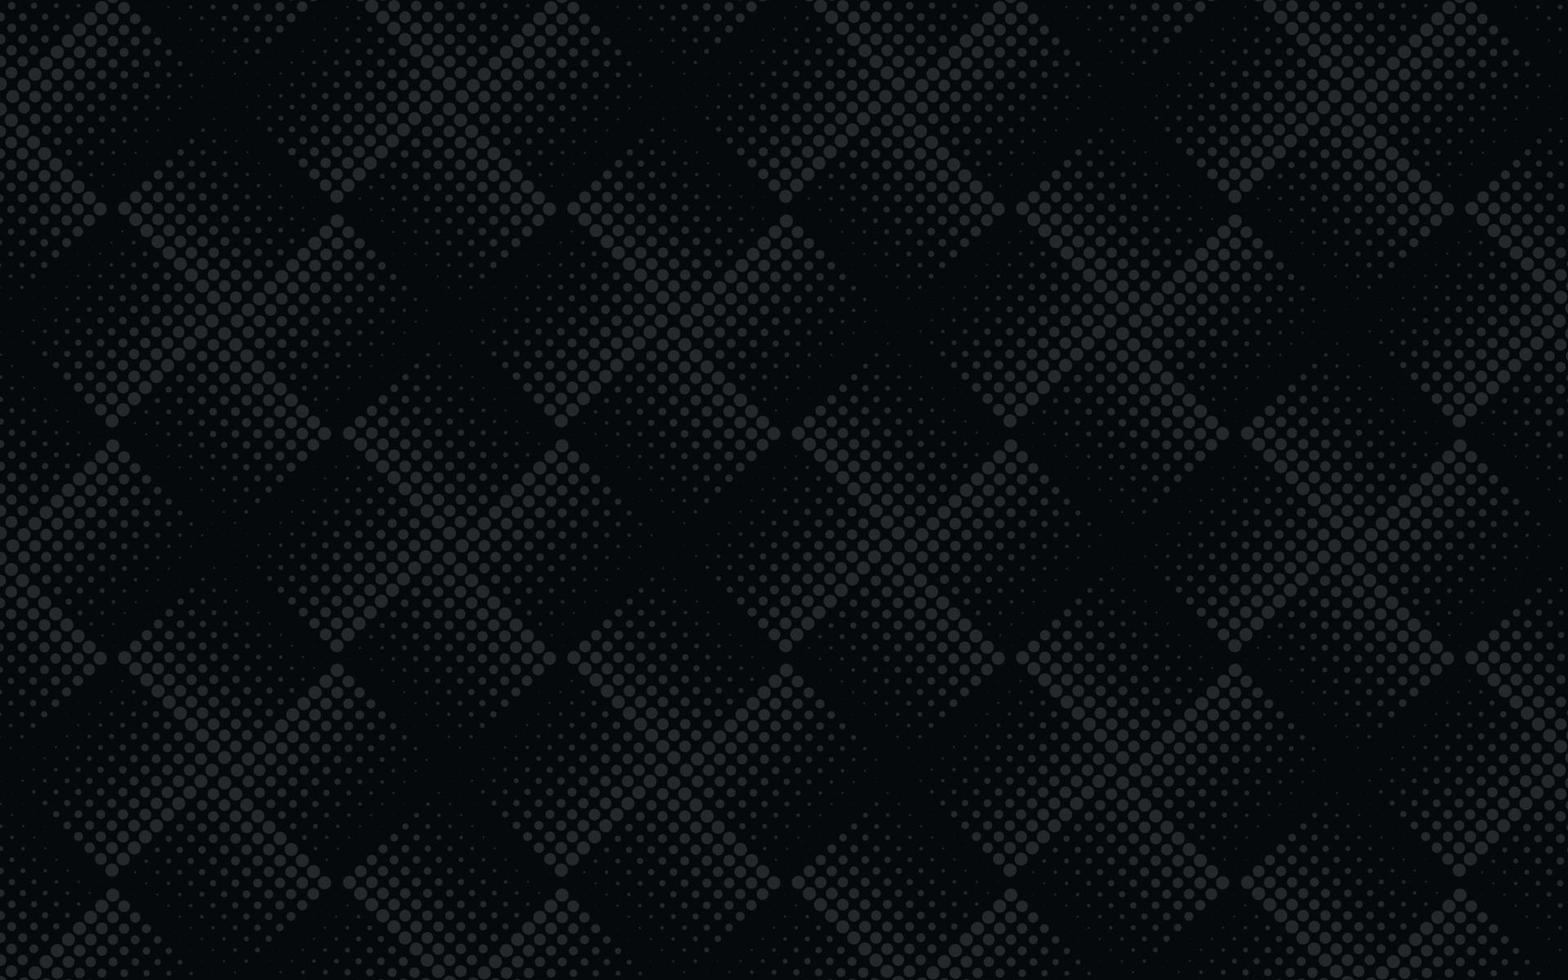 Abstract seamless dark grey halftone lattice pattern on black background. Luxury and elegant pattern. You can use for cover brochure template, poster, banner web, print ad, etc. Vector illustration